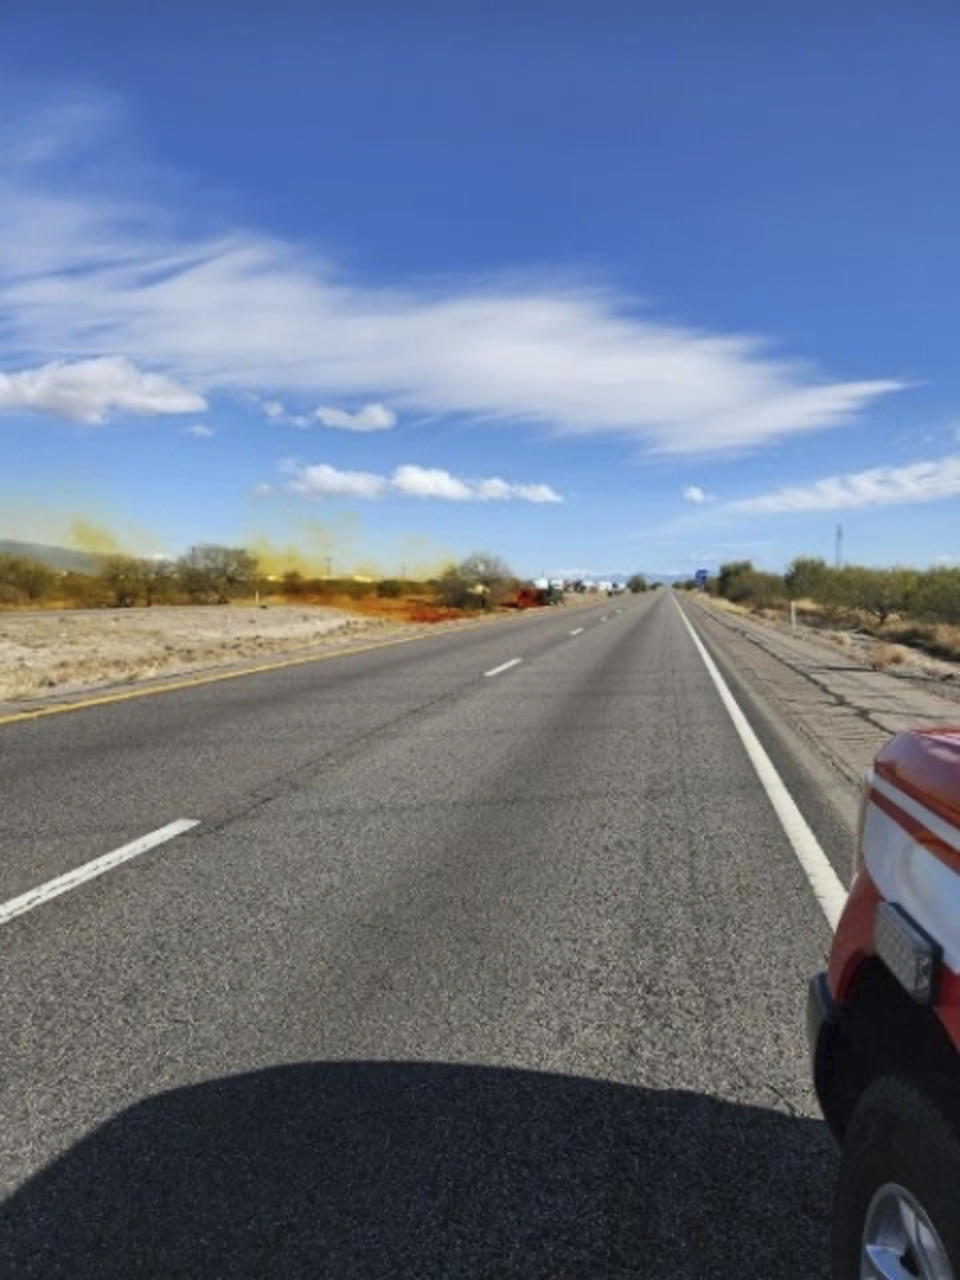 This image provided by the Arizona Department of Public Safety shows what the department says was an accident involving a commercial tanker truck that caused a hazardous material to leak onto Interstate 10 outside Tucson, Ariz., on Tuesday, Feb. 14, 2023, prompting state troopers to shut down traffic on the freeway. (Arizona Department of Public Safety via AP)